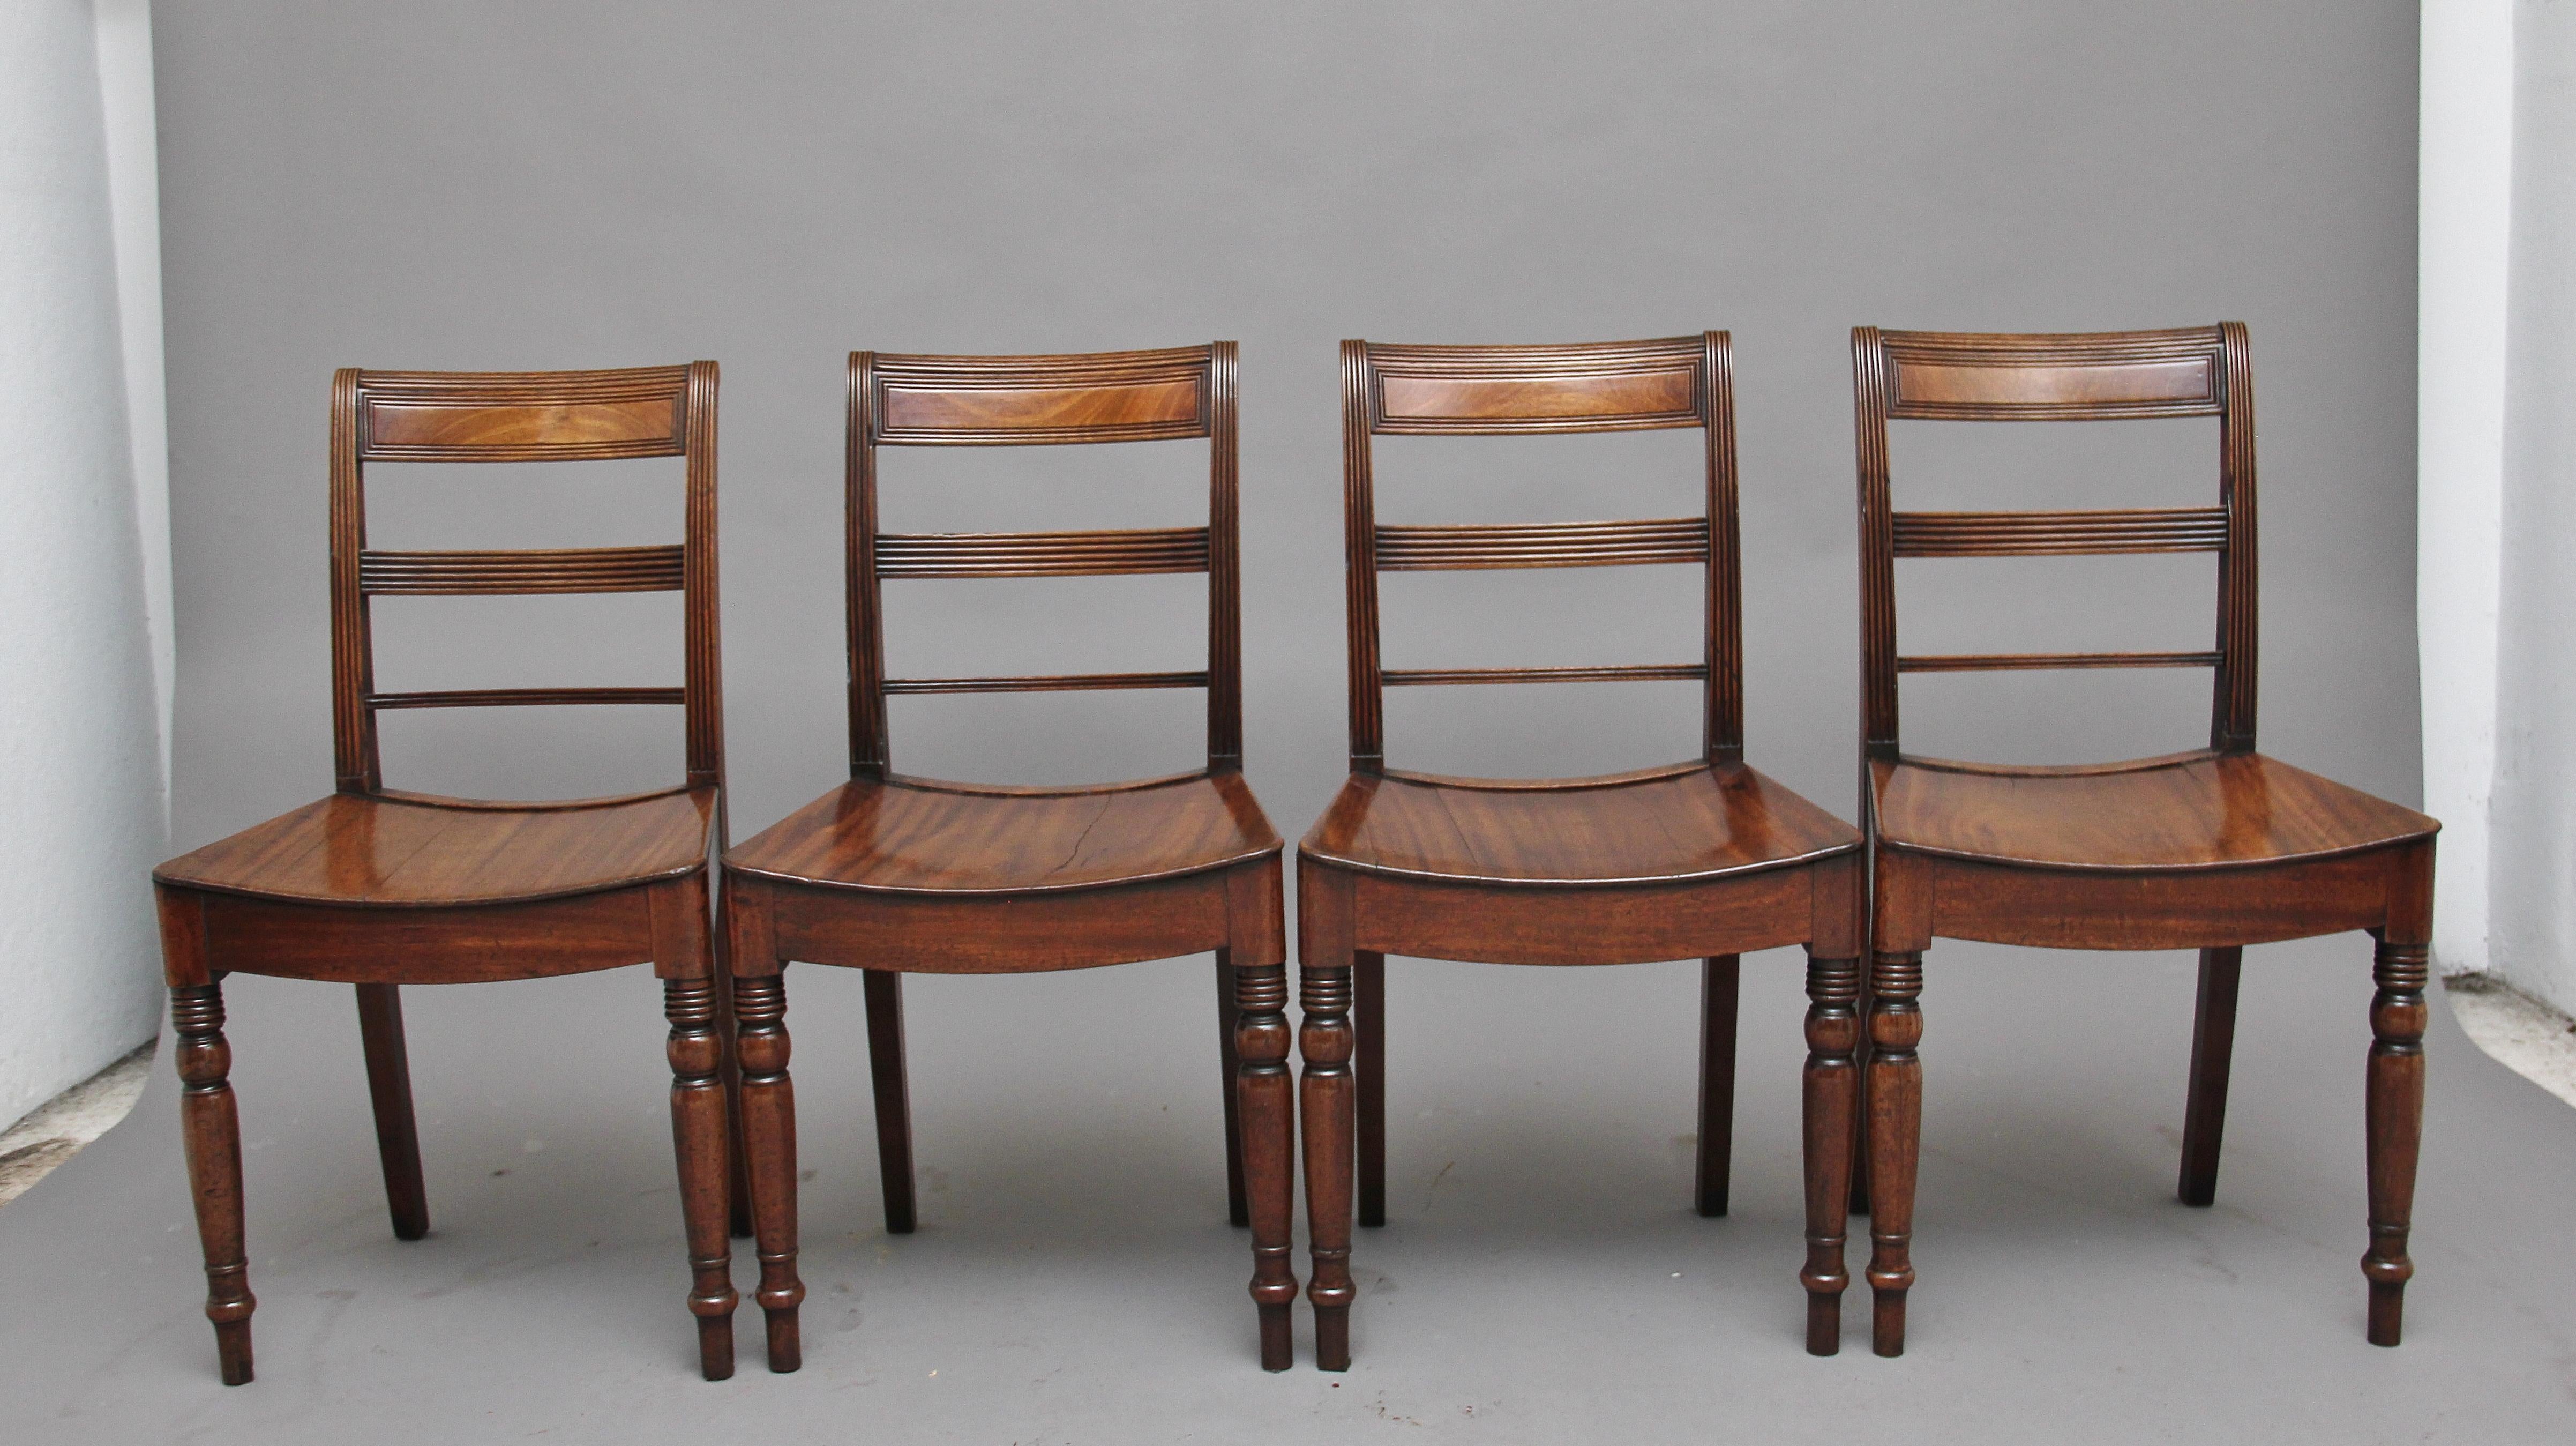 A set of four early 19th century mahogany side chairs with a slightly arched hardwood seat, having reeded back rails, supported on outswept back square legs and elegant turned front legs, circa 1830.